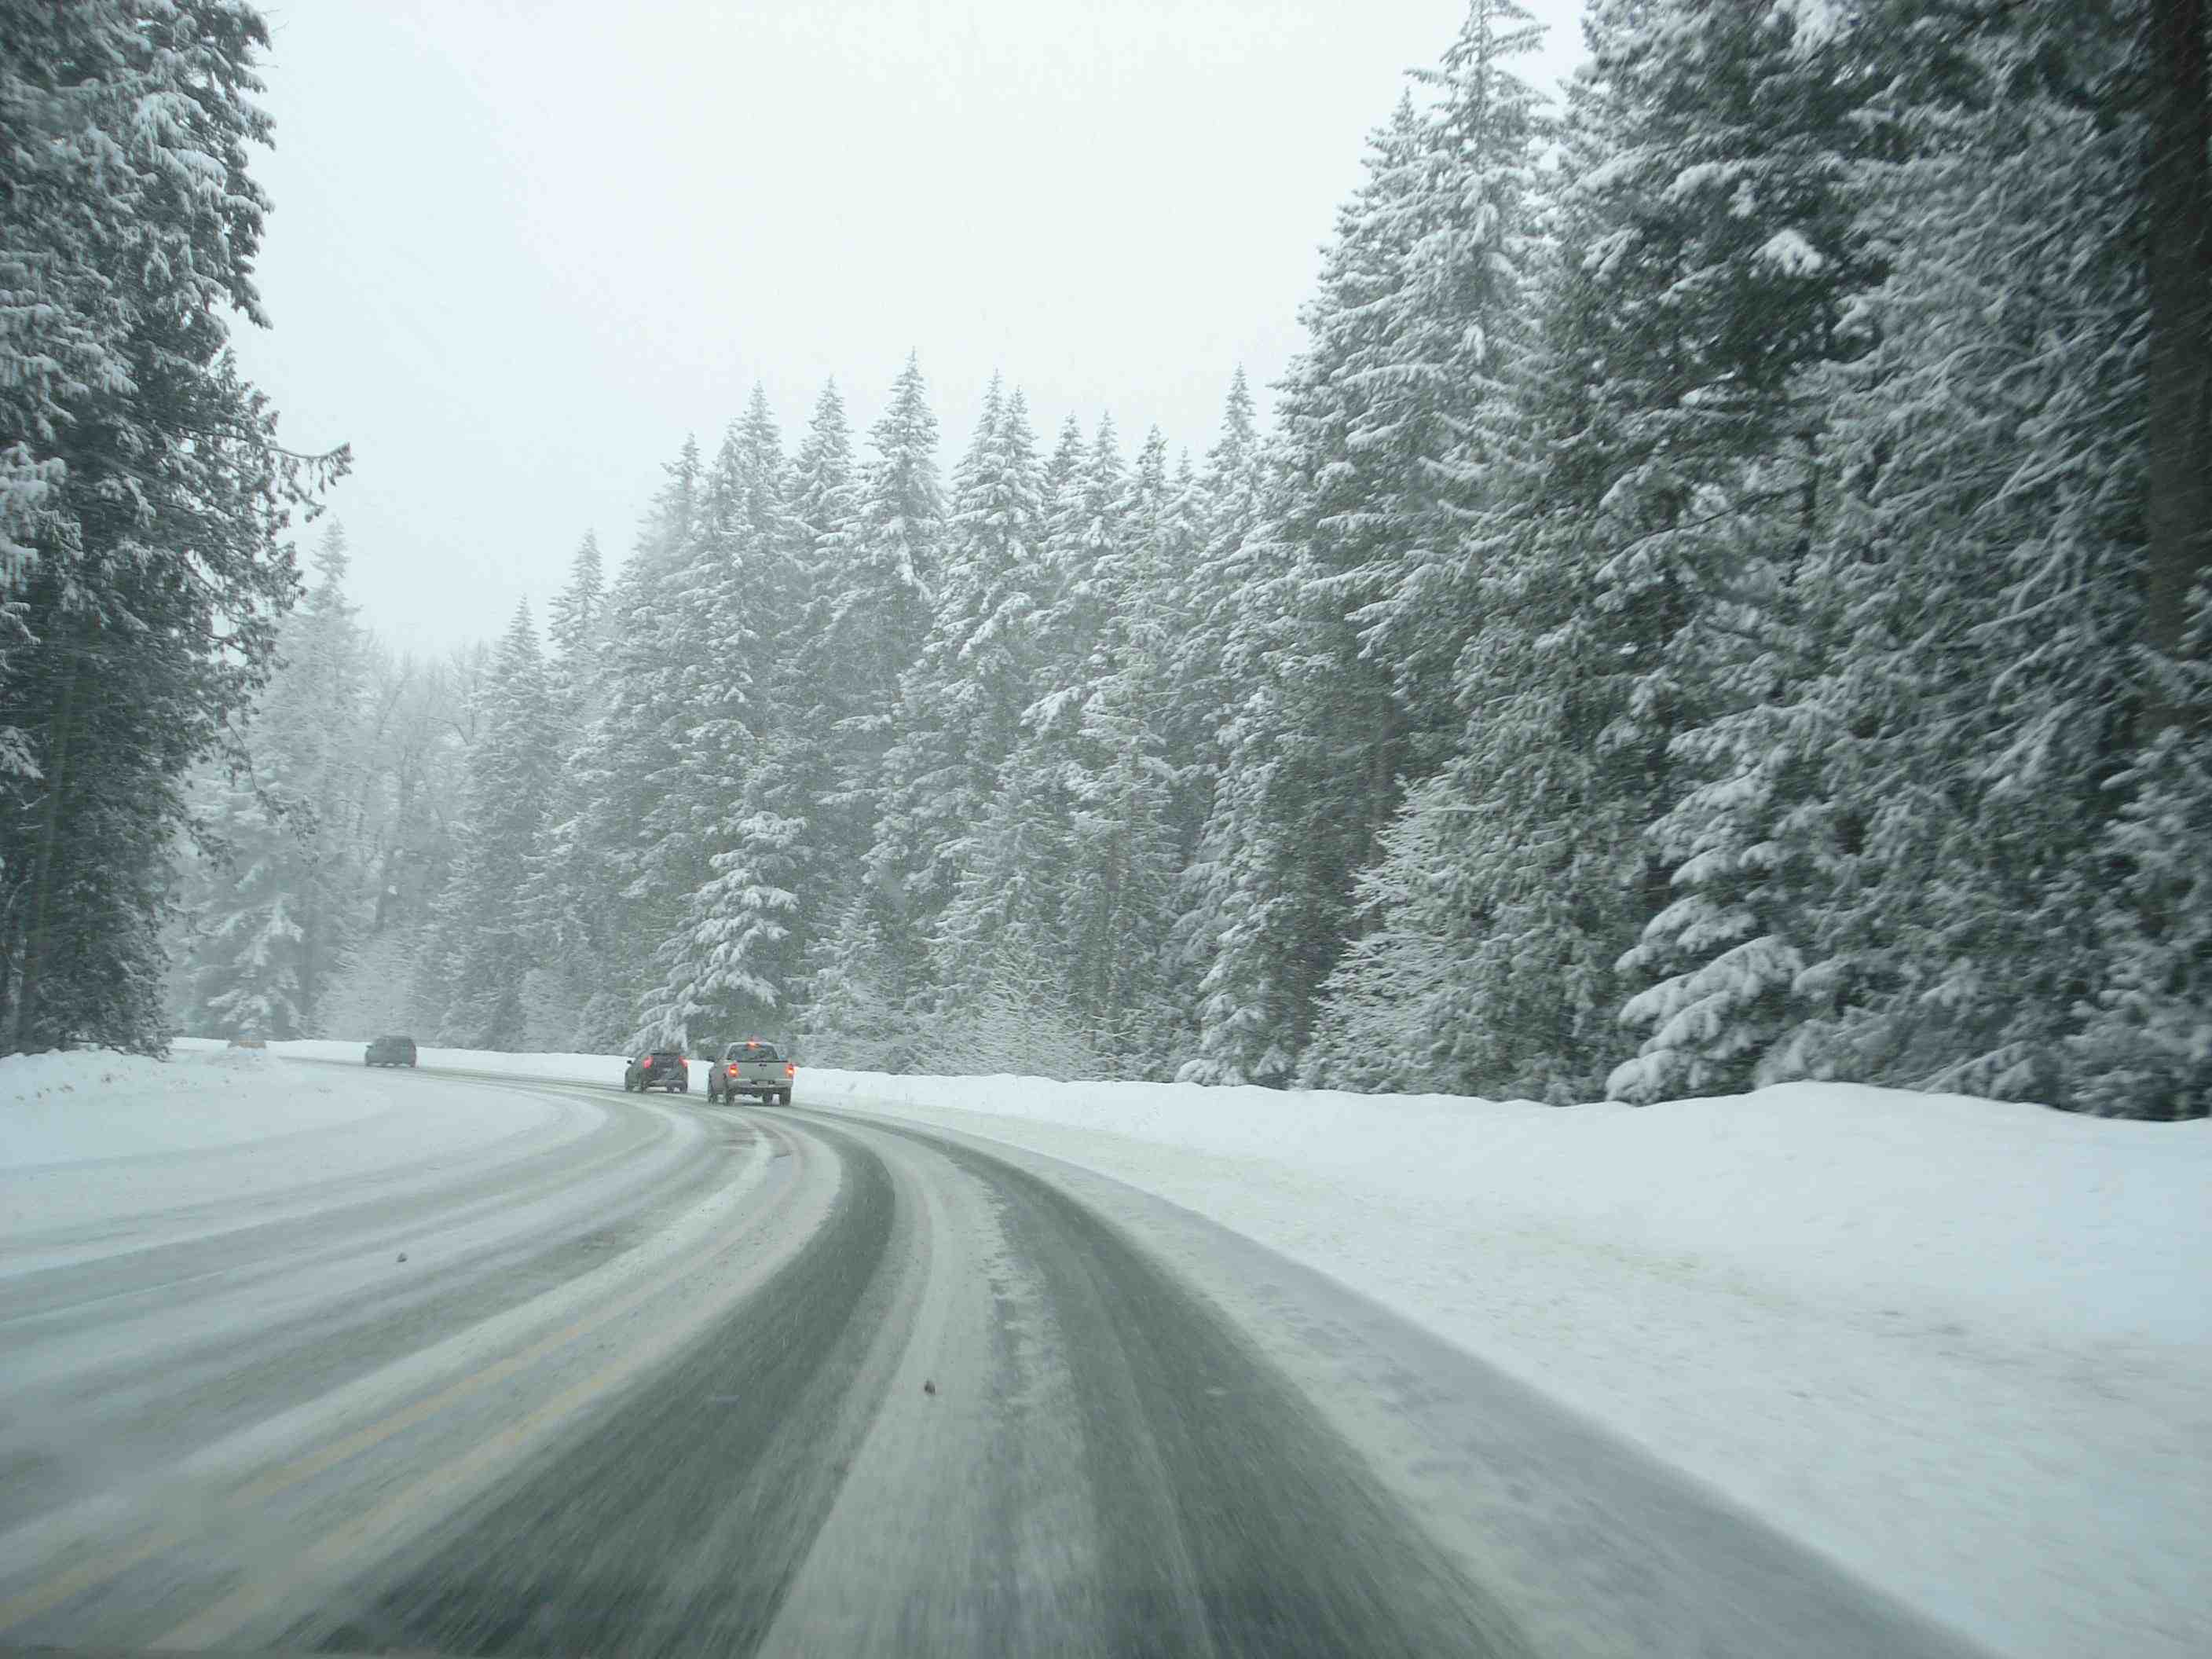 Winter weather conditions and icy roads are the cause of many car accidents.